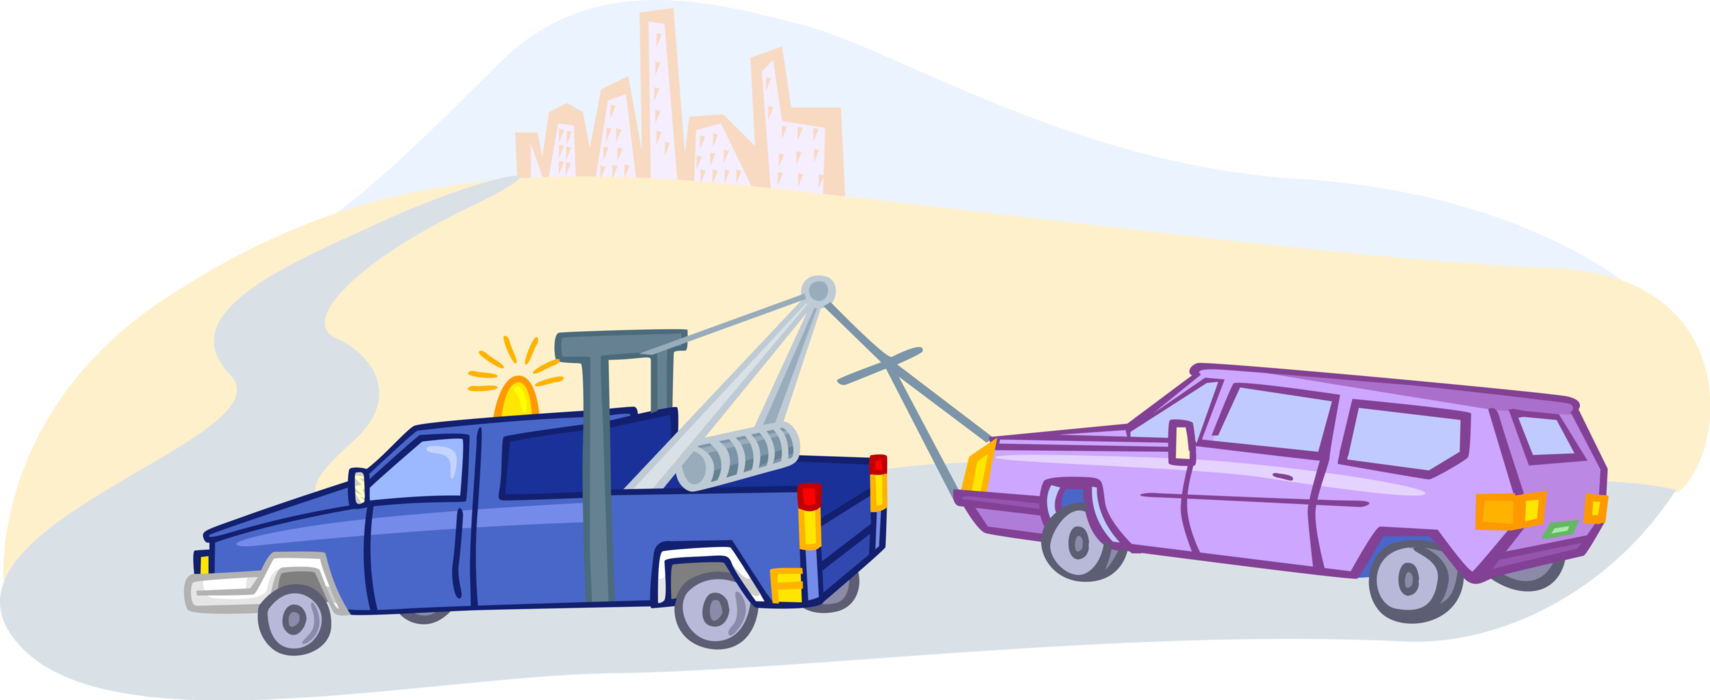 Vector Illustration of Tow Truck Wrecker Recovery Vehicle with Disabled Car from Auto Accident